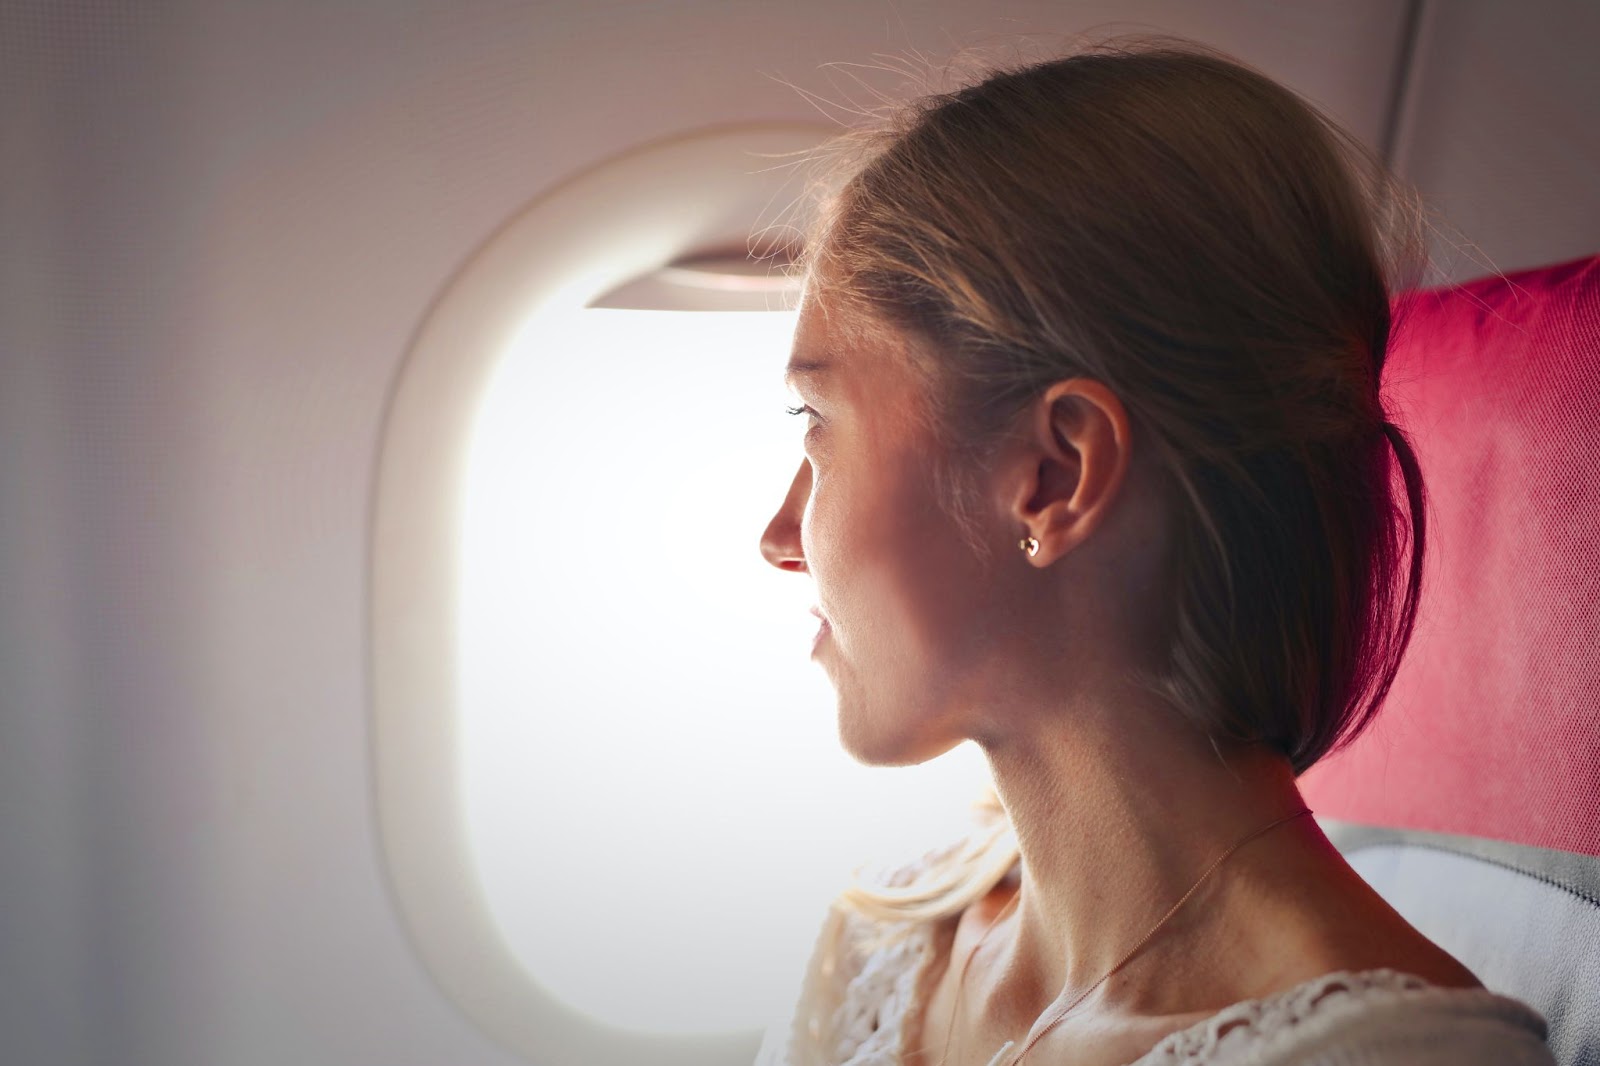 11 Ways To Make Your Next Flight More Bearable